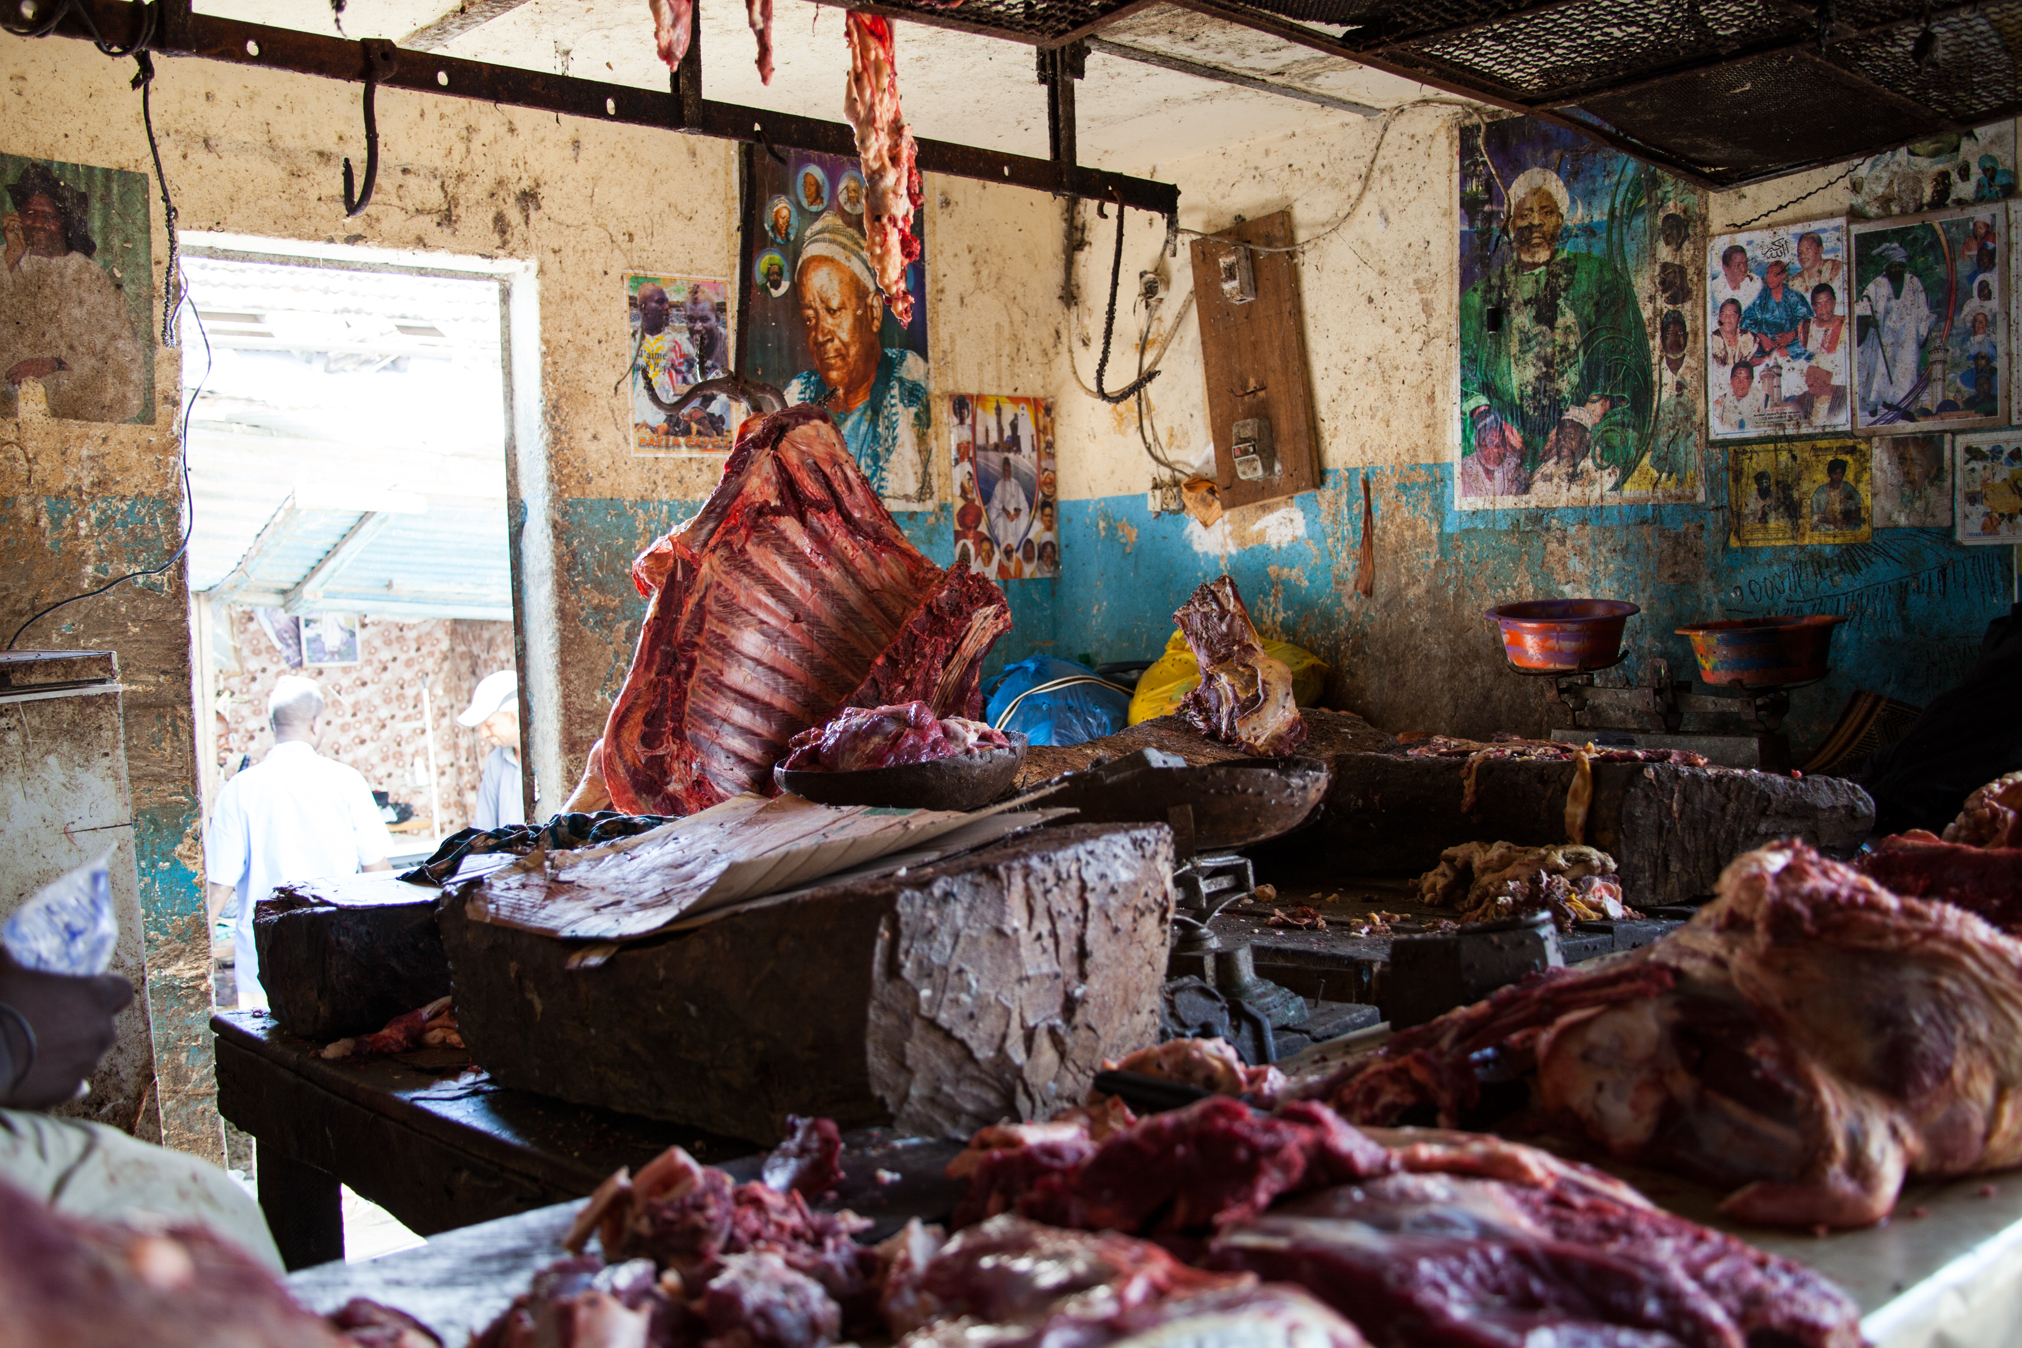 Slabs of meat at the market in Kaolack, Senegal